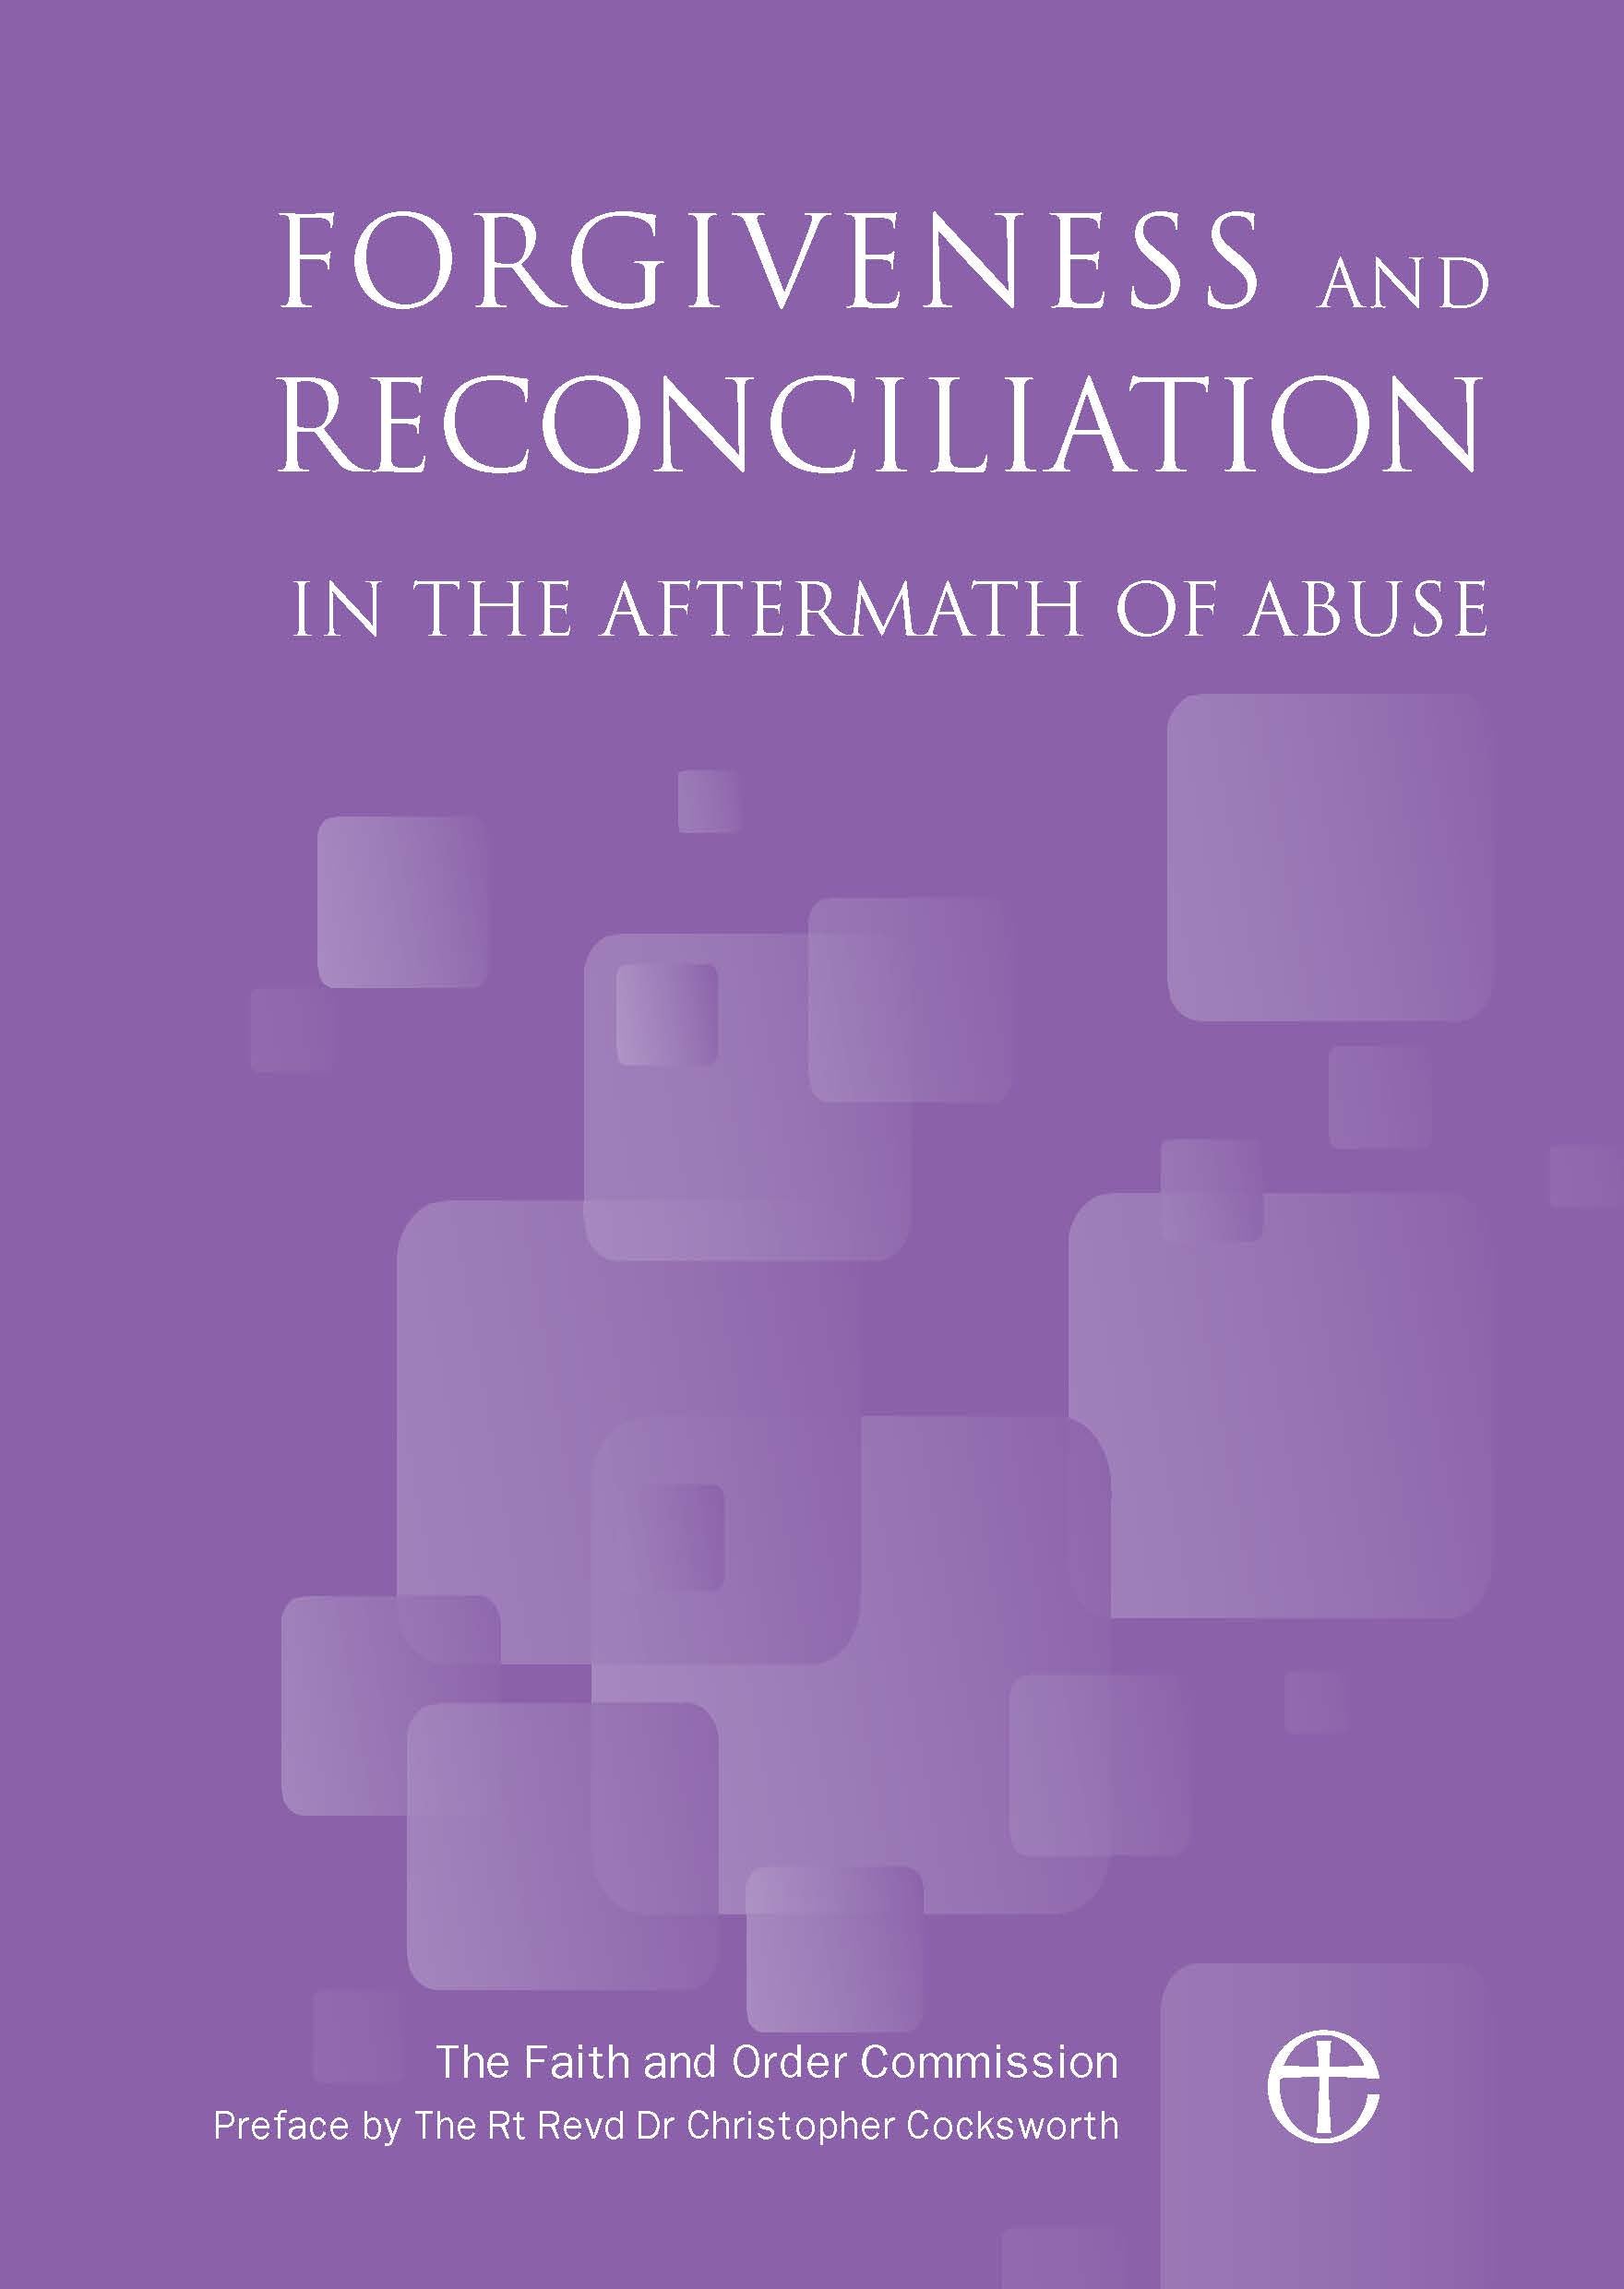 Image of Forgiveness and Reconciliation in the Aftermath of Abuse other